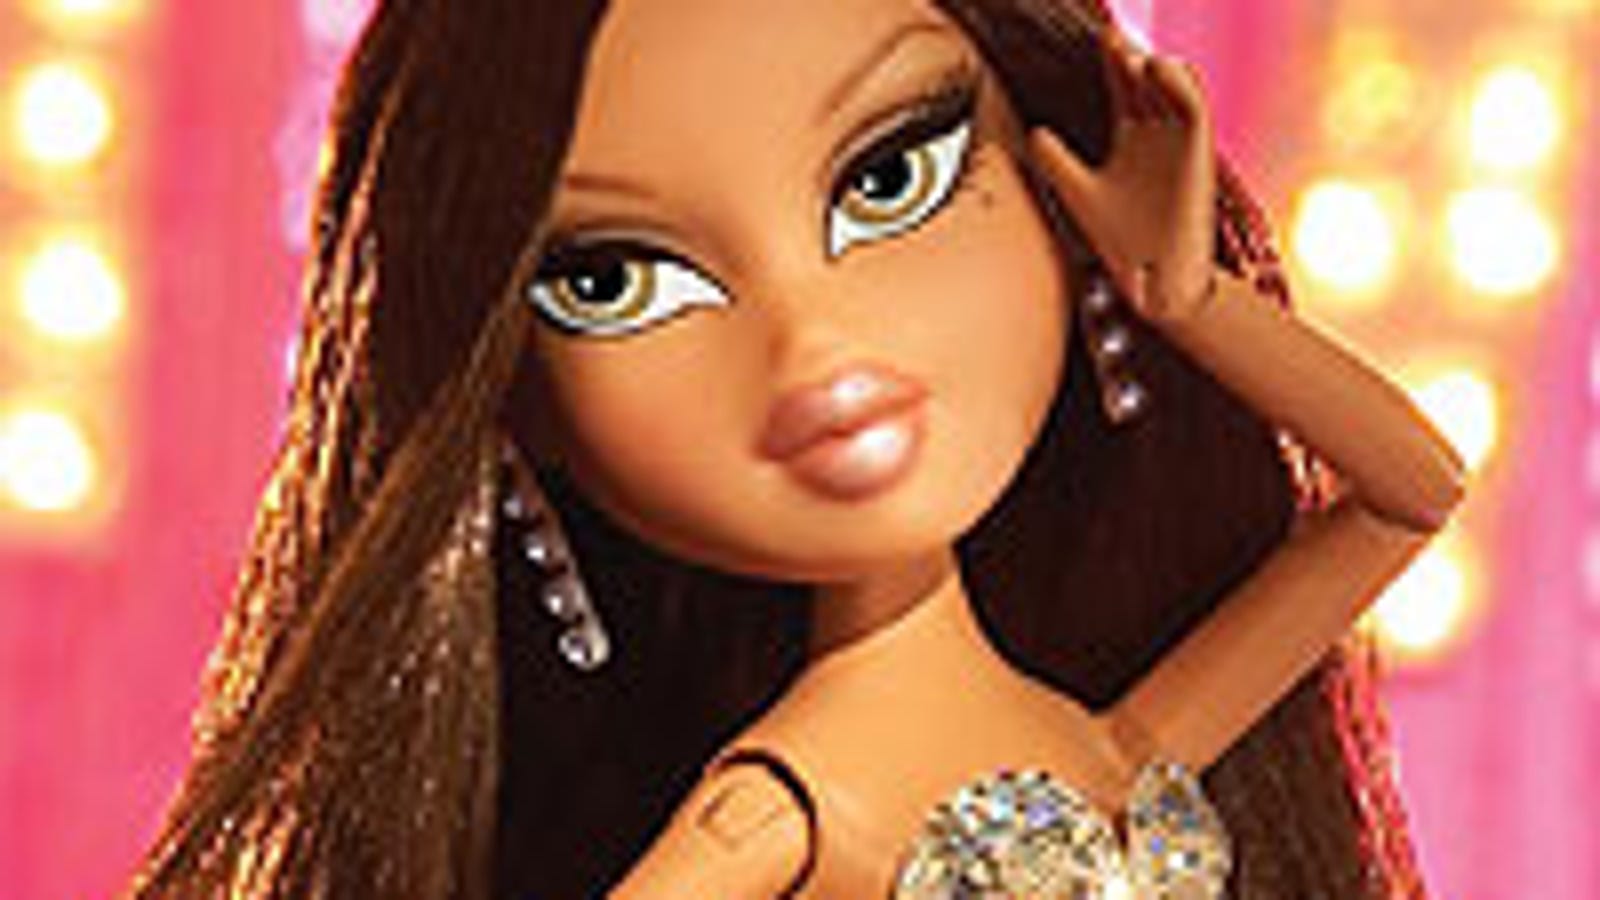 Bratz: Campaign To Convince Parents Movie Is Harmless In Full Effect